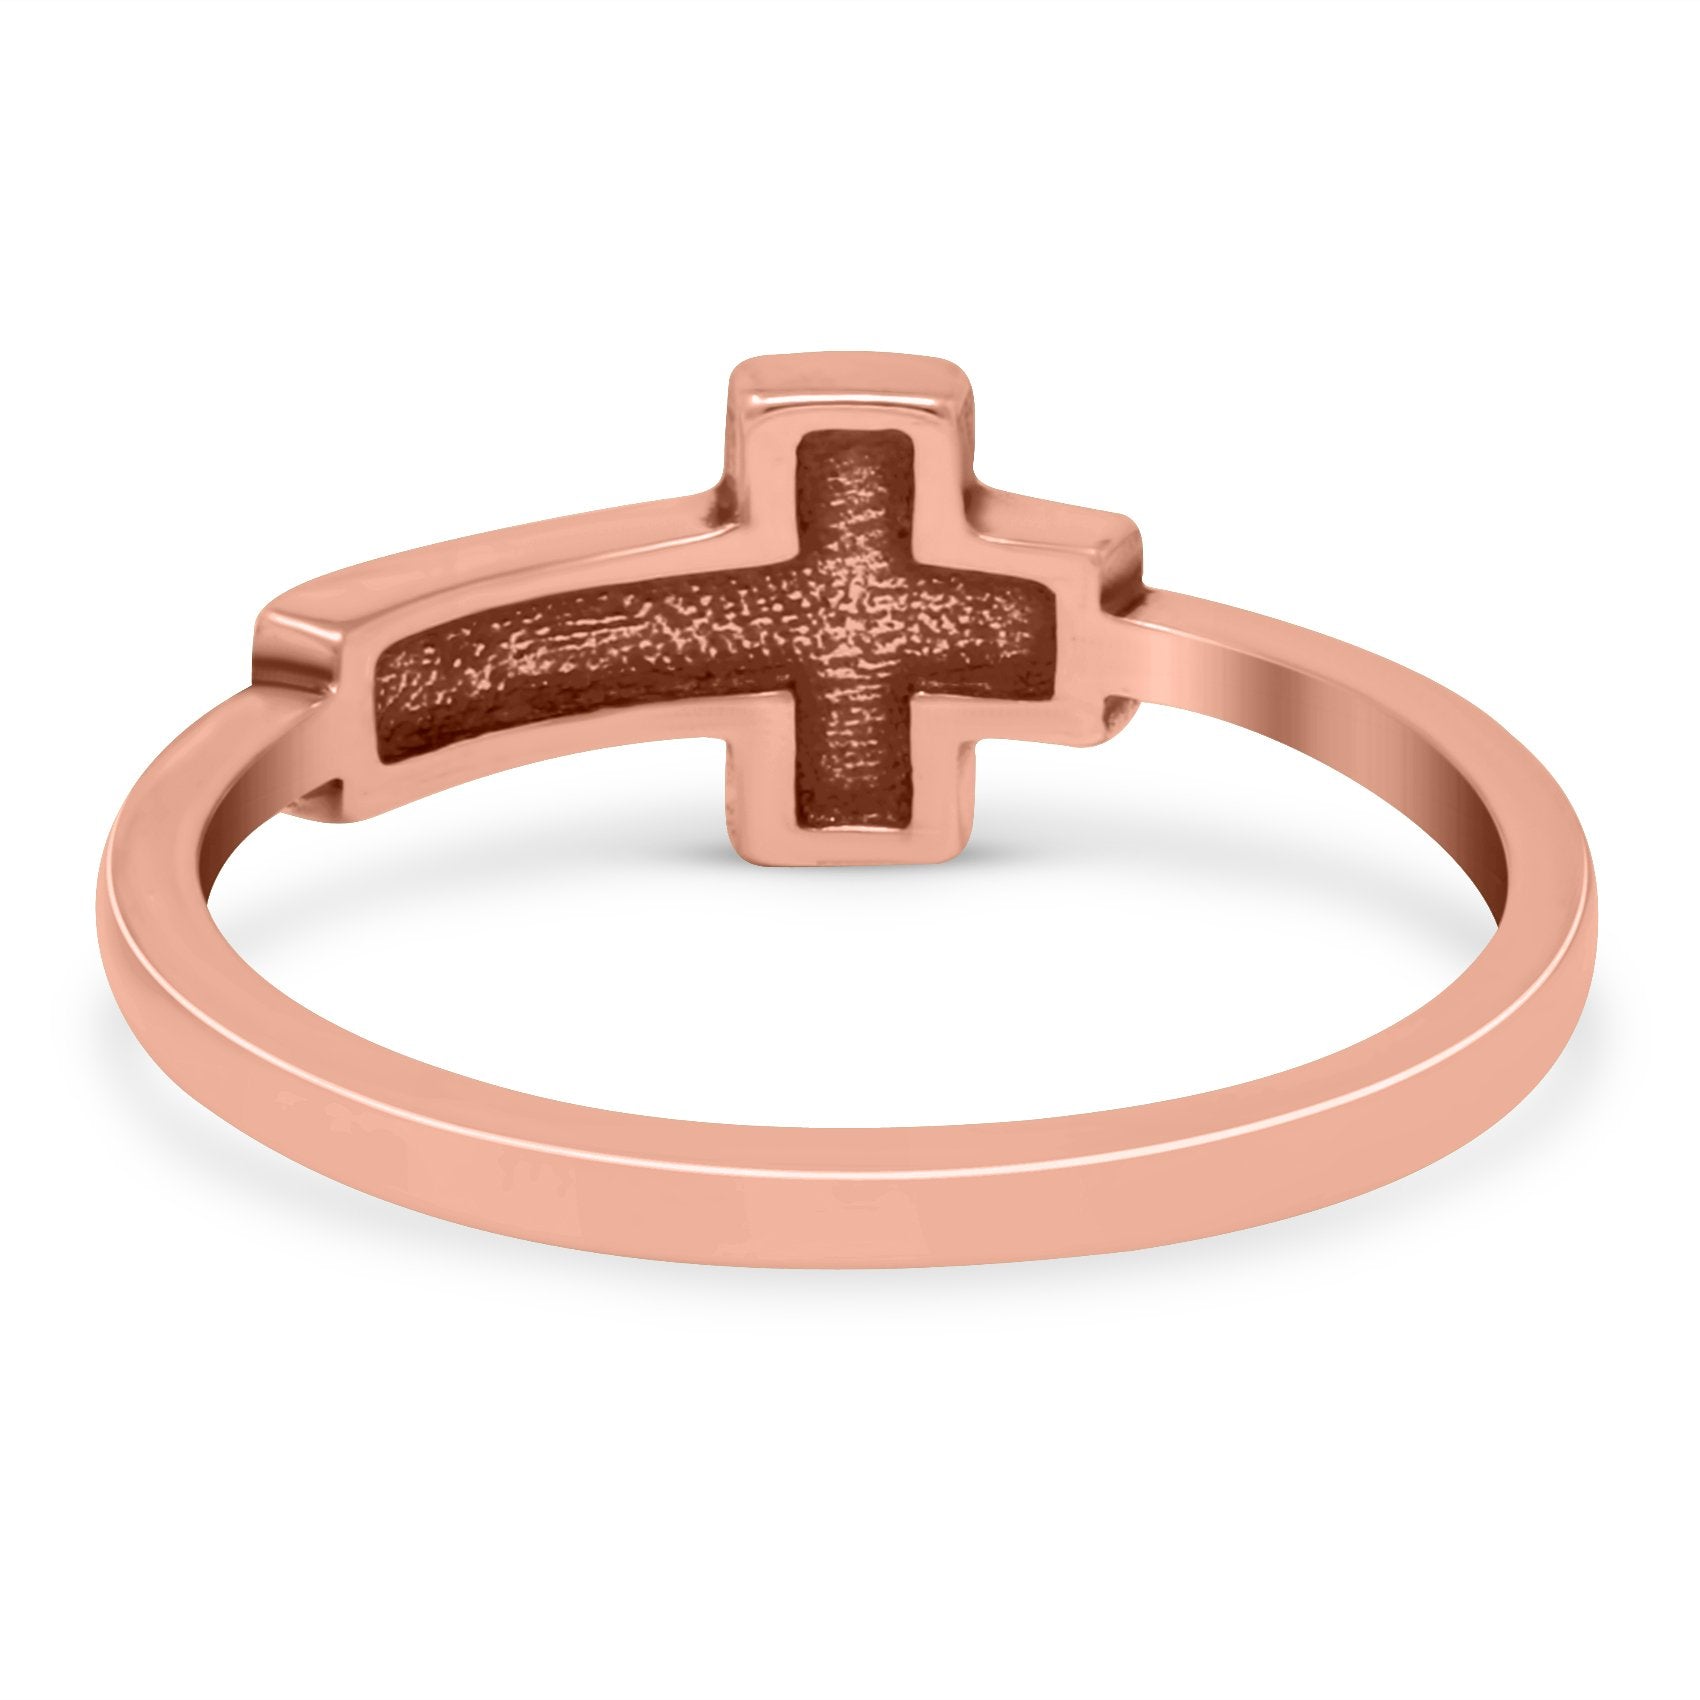 Believe Cross Band Oxidized Ring Solid 925 Sterling Silver (7mm)